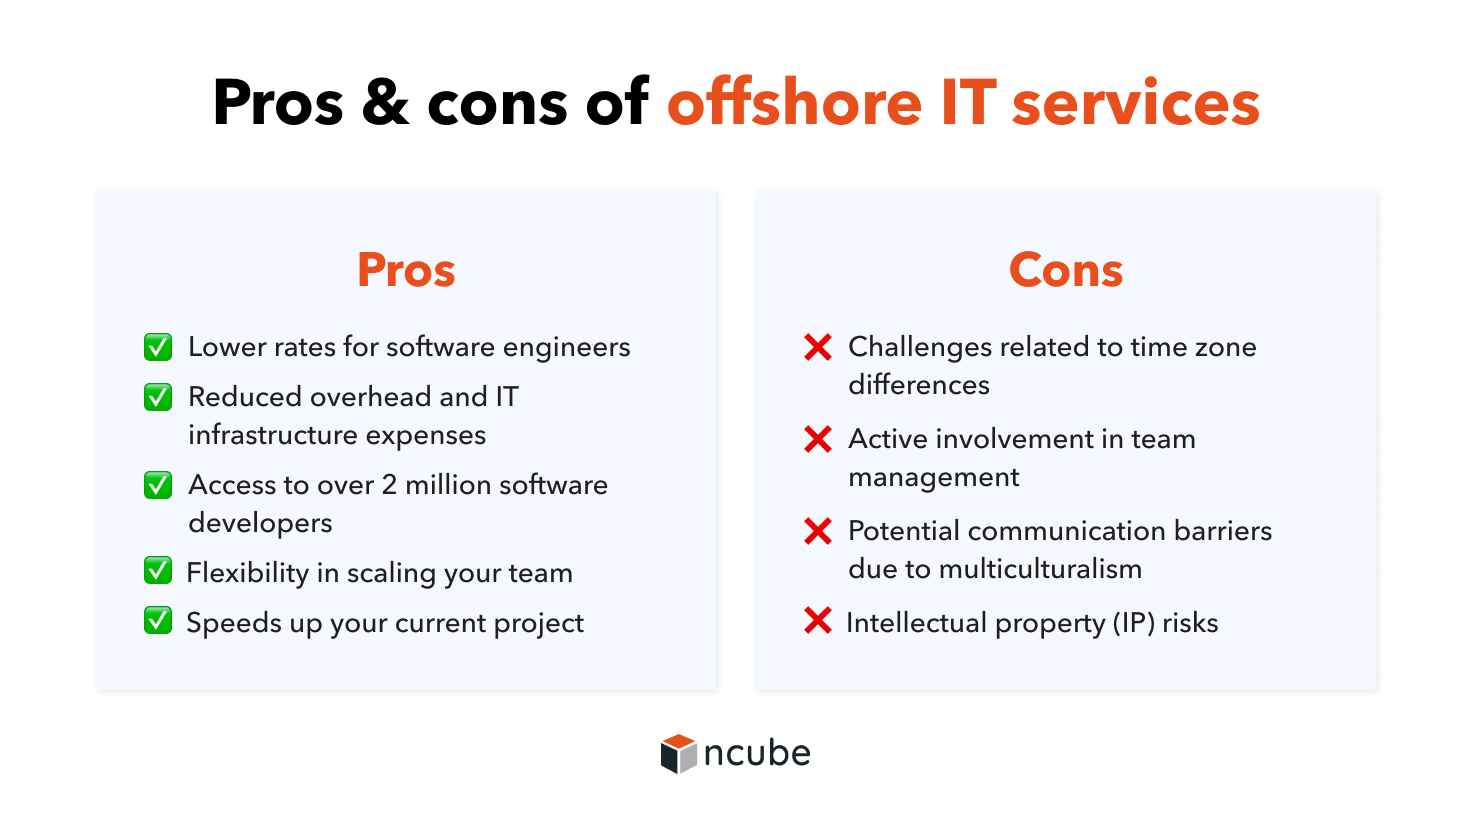 pros and cons of IT offshoring